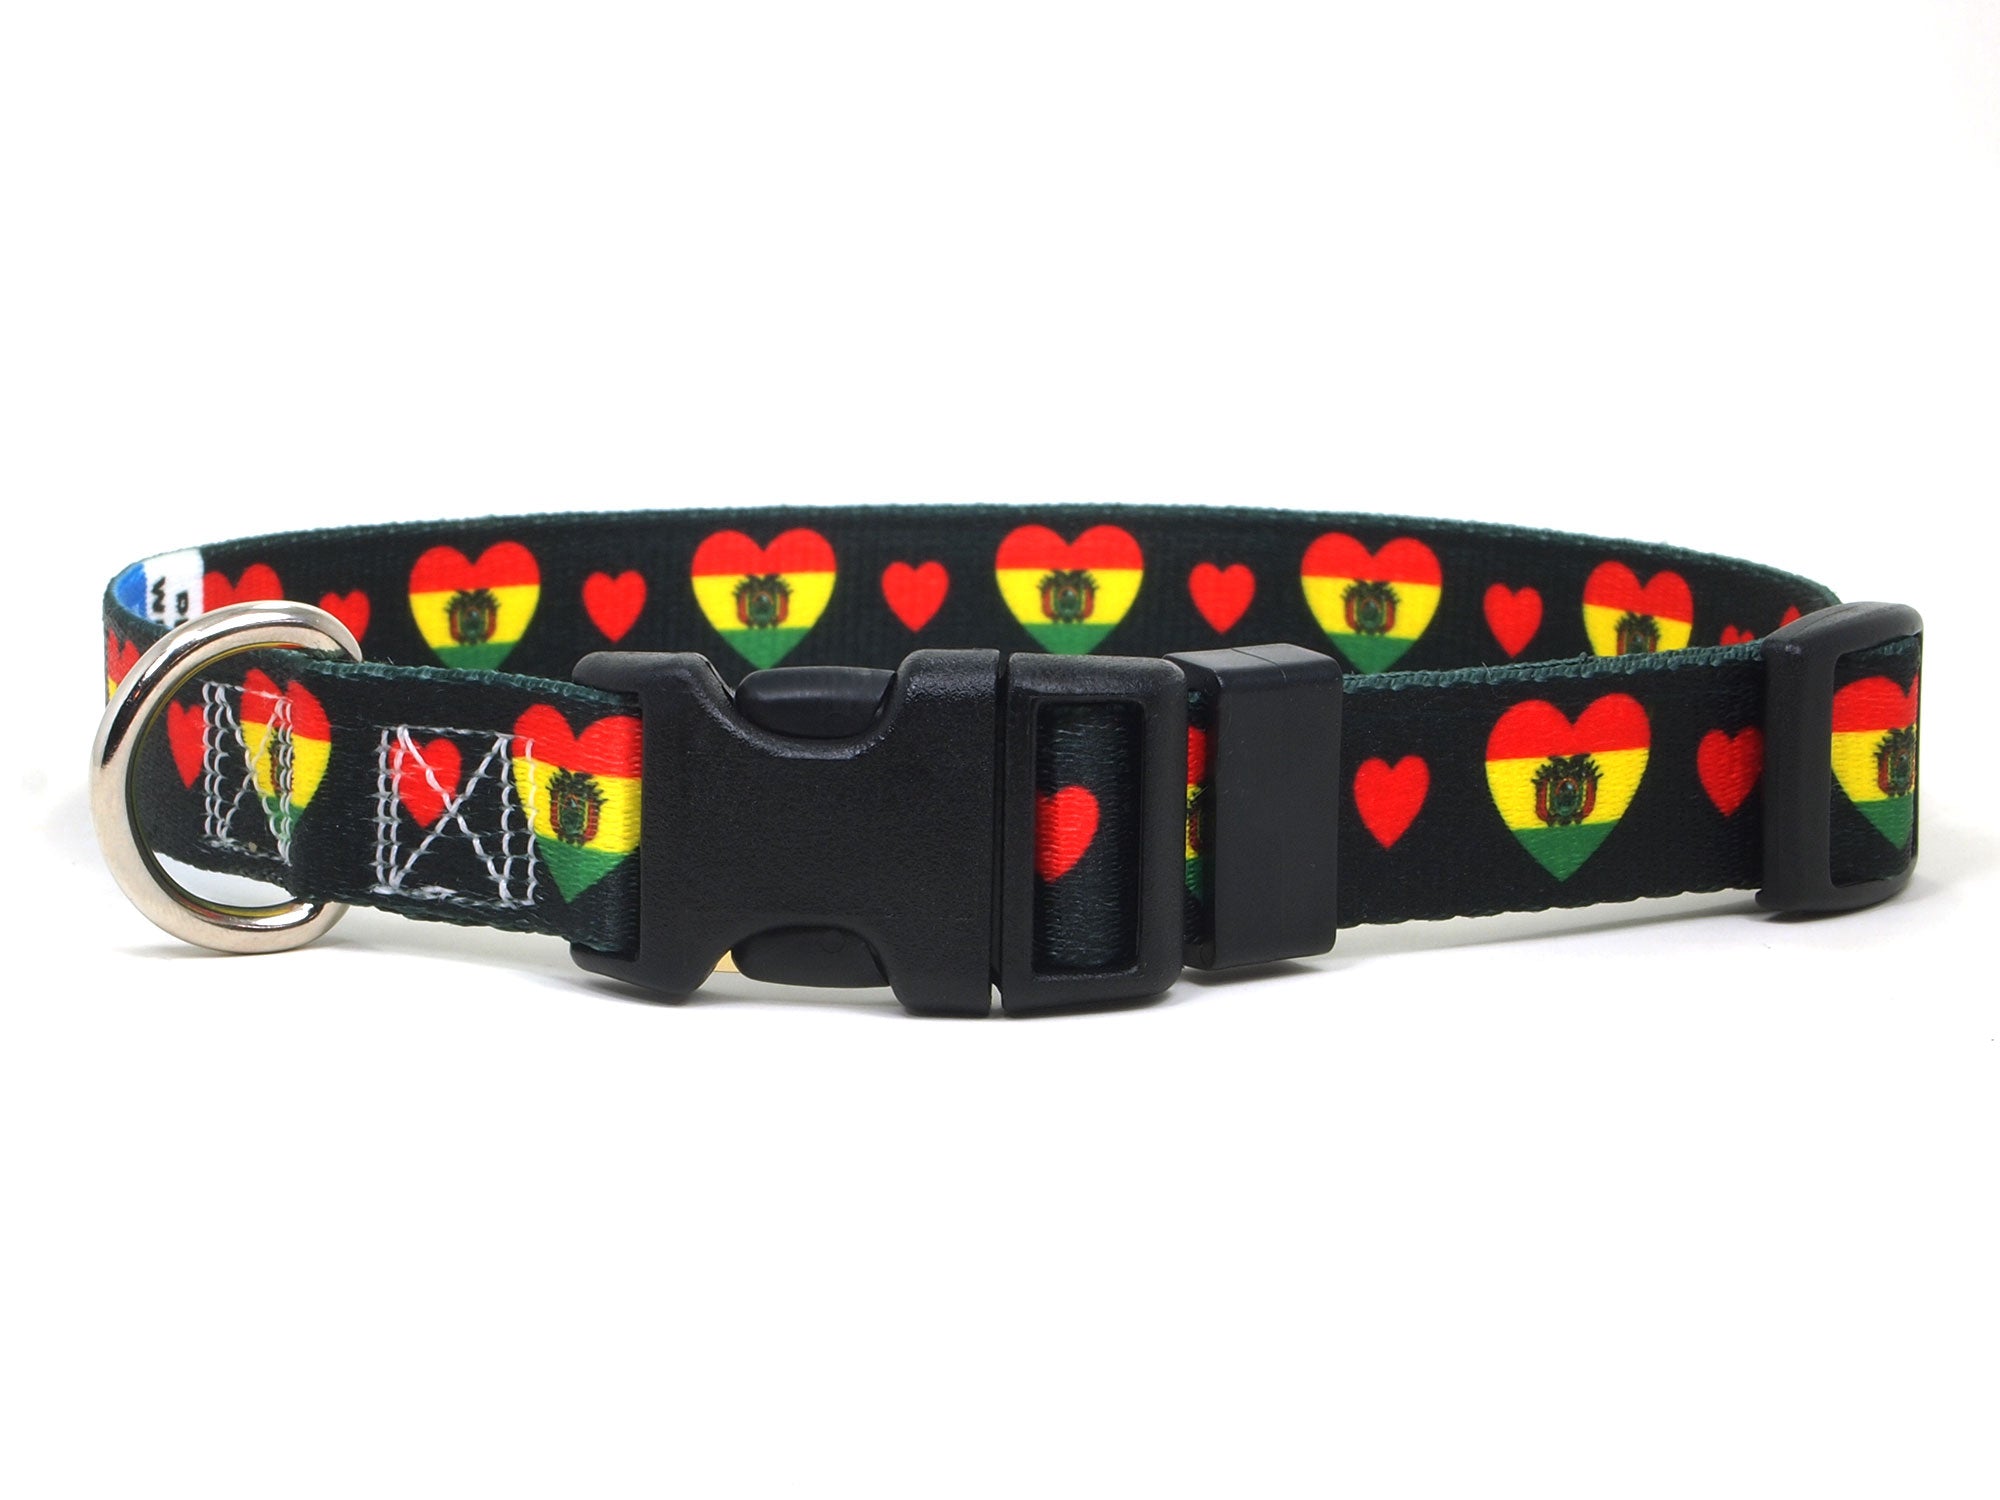 Dog Collar with Bolivia Hearts Pattern in black